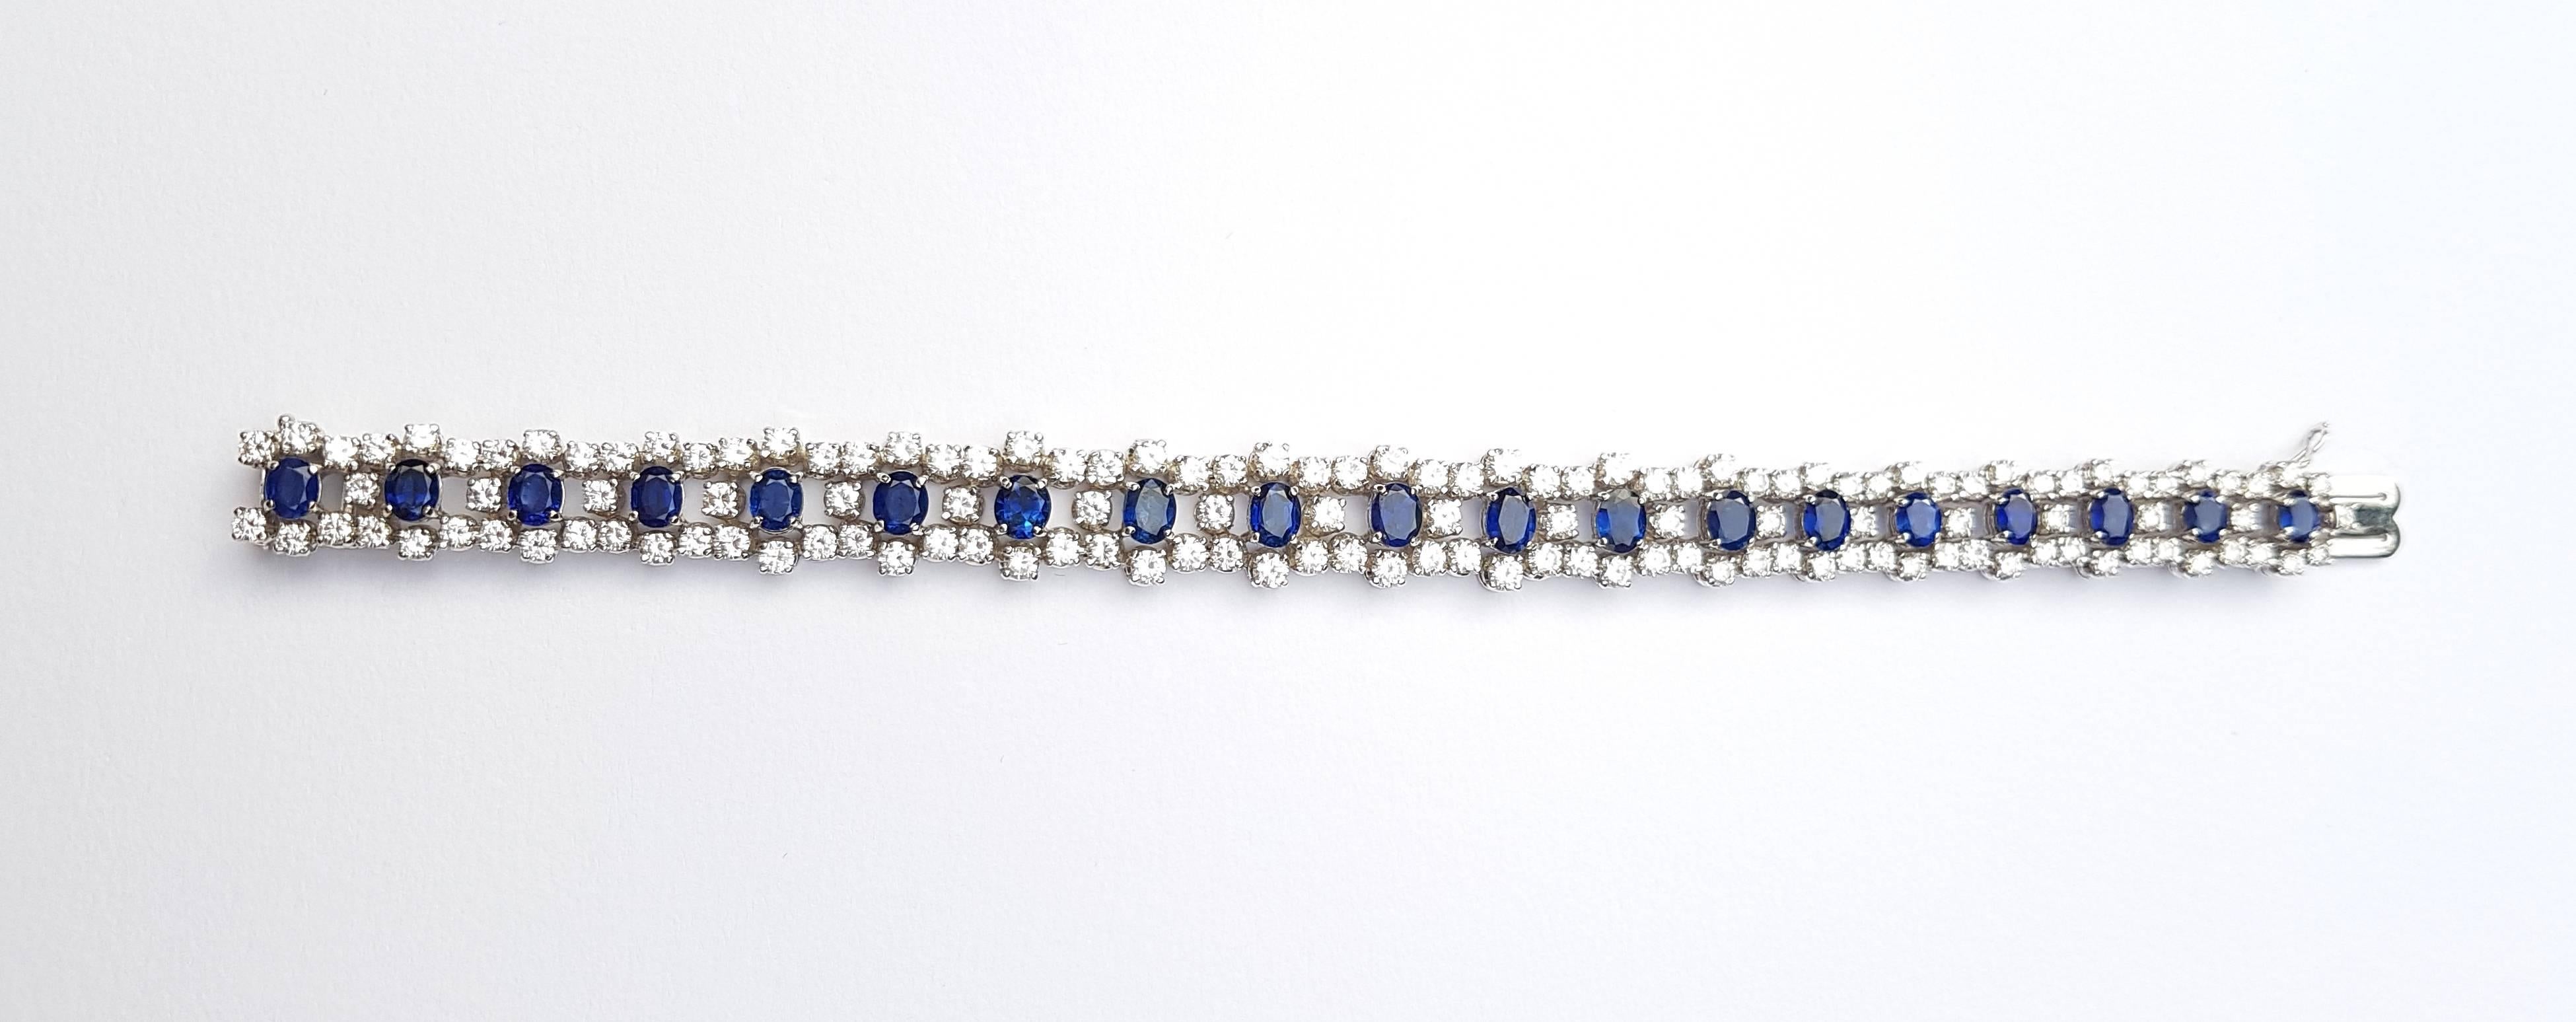 Extraordinary Missiaglia Bracelet ,completely Handcrafted in white 18kt Gold with 10.15 Carats of Sapphires and 9.50 Carats of Diamonds .